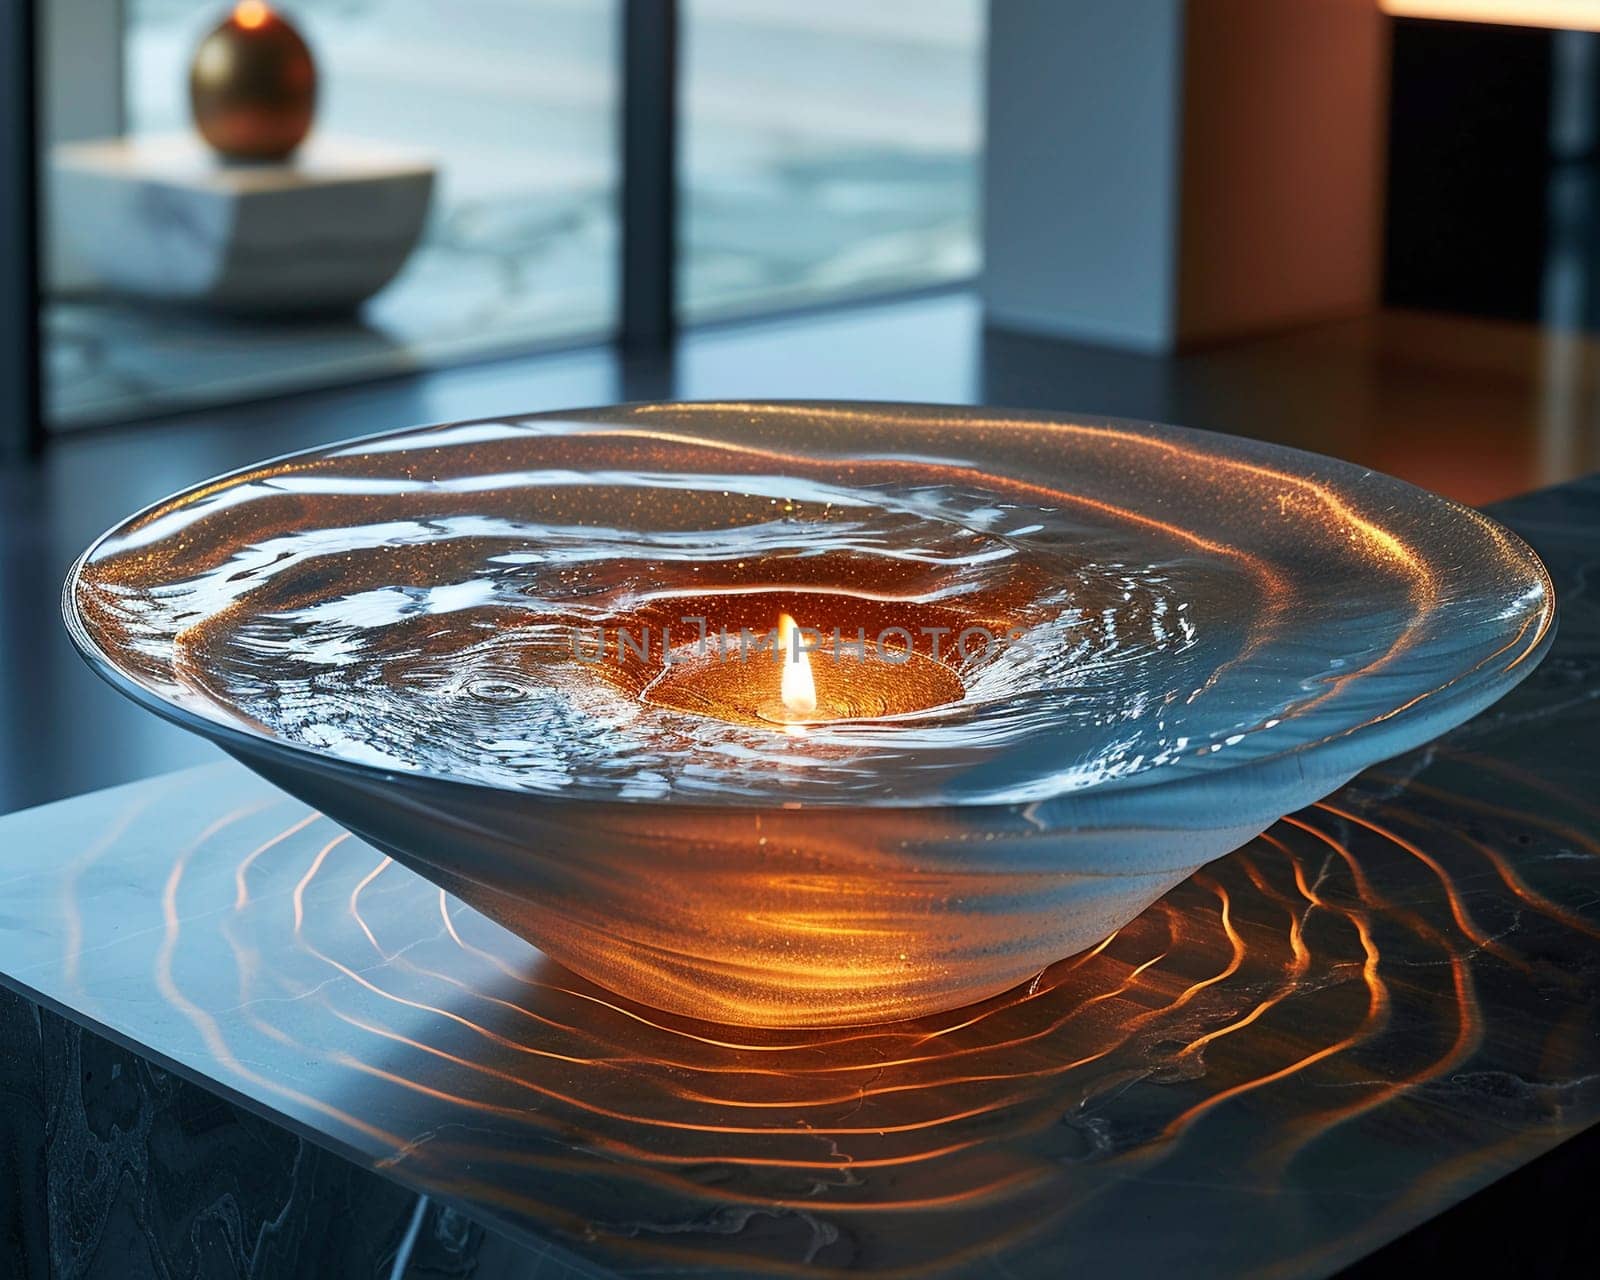 Holy Water Font with Gentle Ripples Reflecting Light, The movement of water creates an aura of purification and blessing.